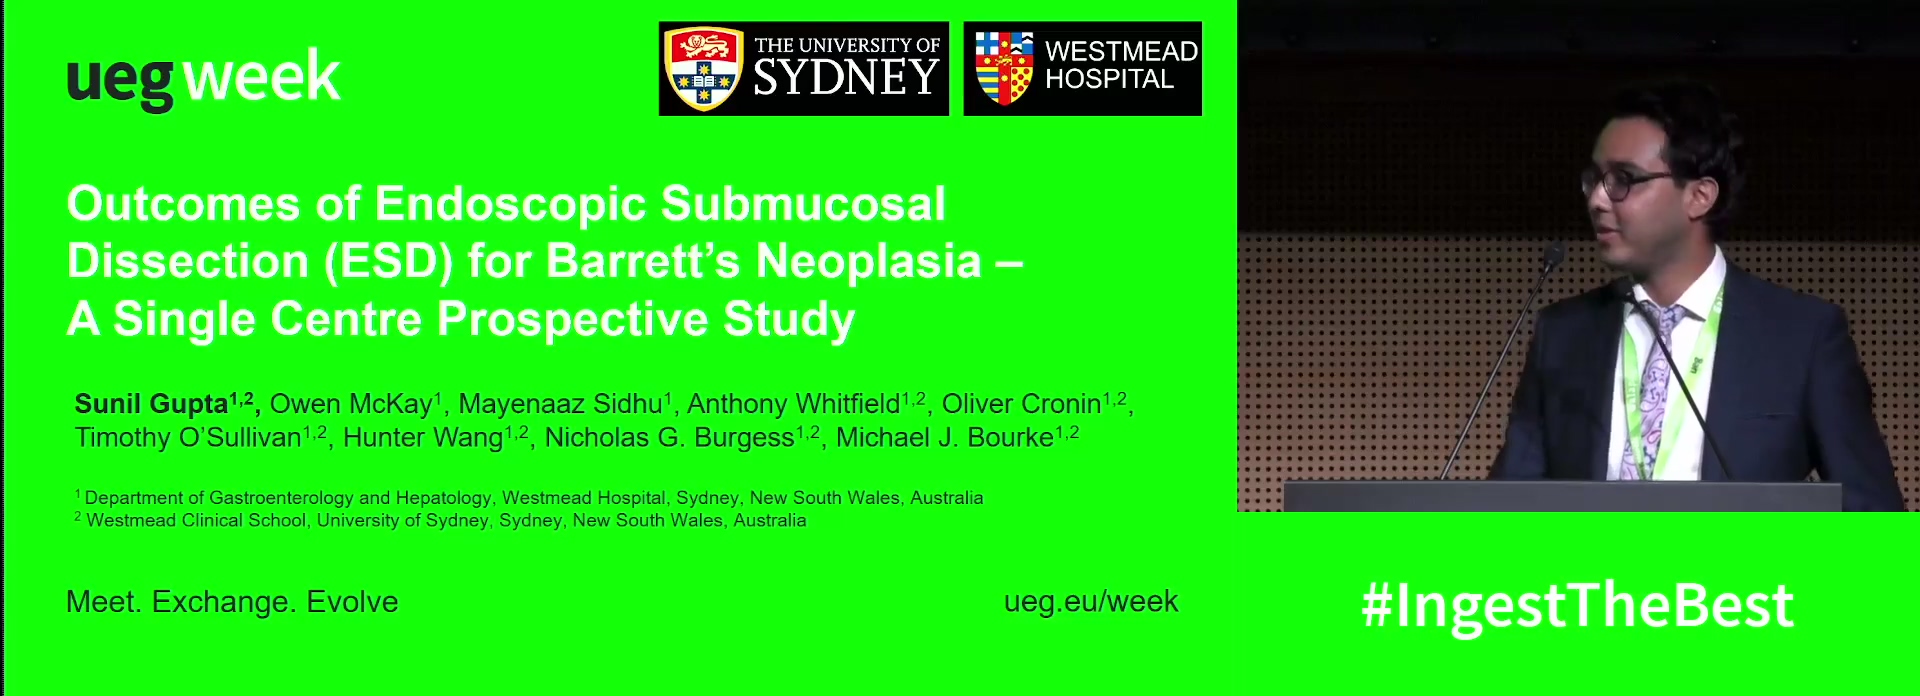 OUTCOMES OF ENDOSCOPIC SUBMUCOSAL DISSECTION (ESD) FOR BARRETT’S NEOPLASIA – A SINGLE CENTRE PROSPECTIVE STUDY